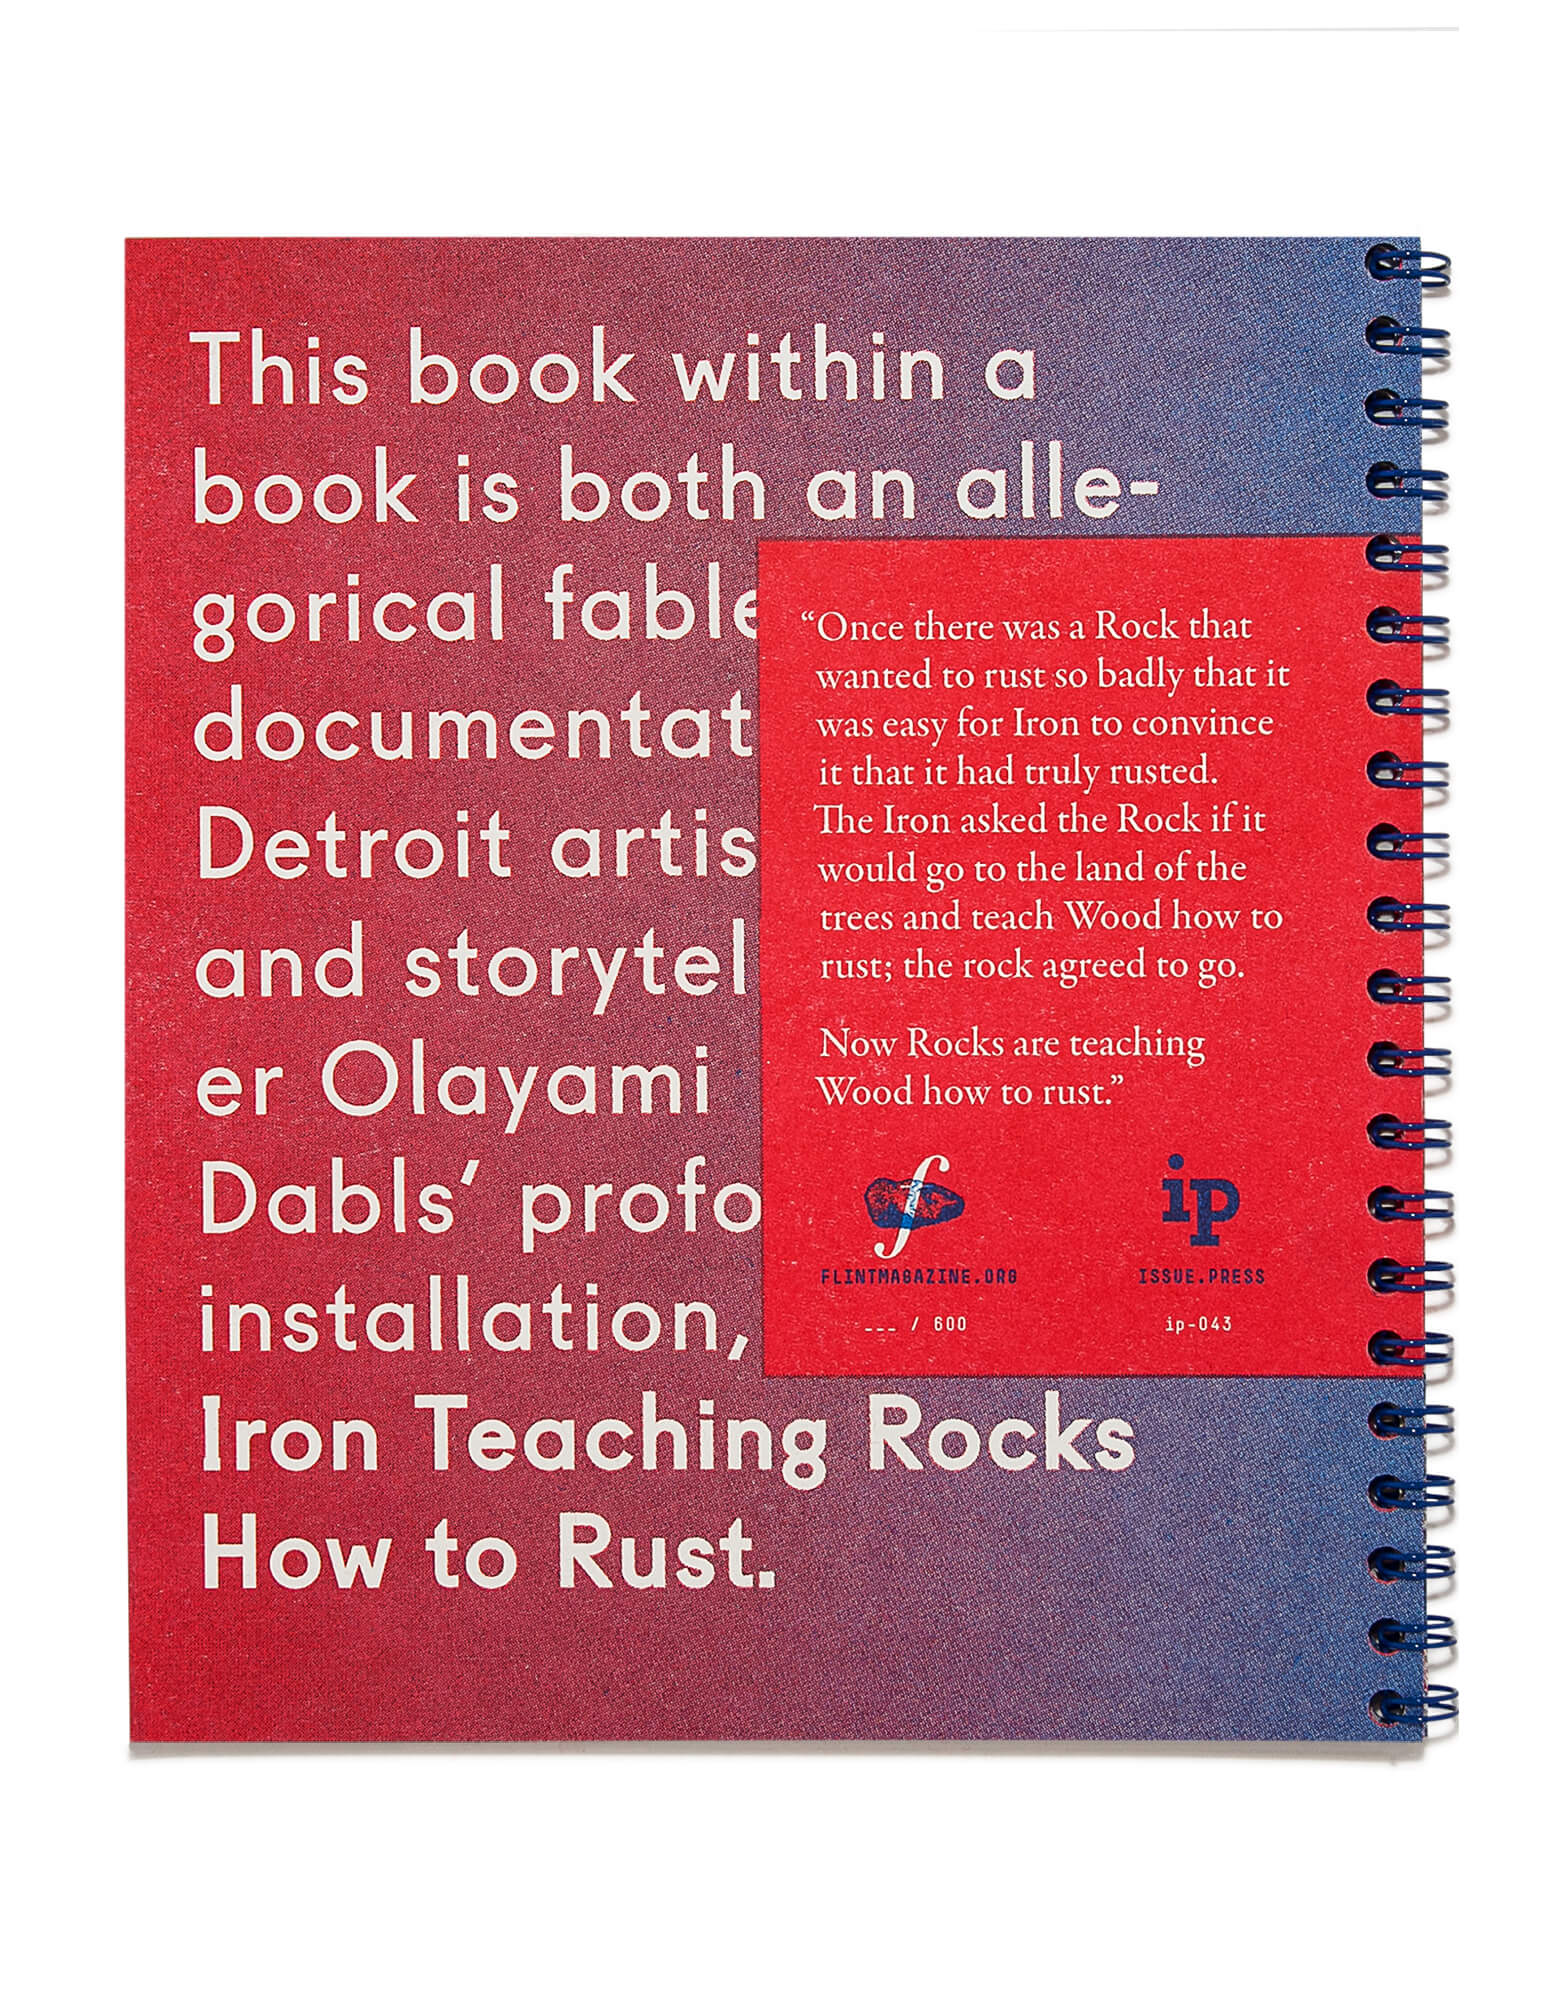 Excerpt of Iron Teaching Rocks How to Rust by Olayami Dabls